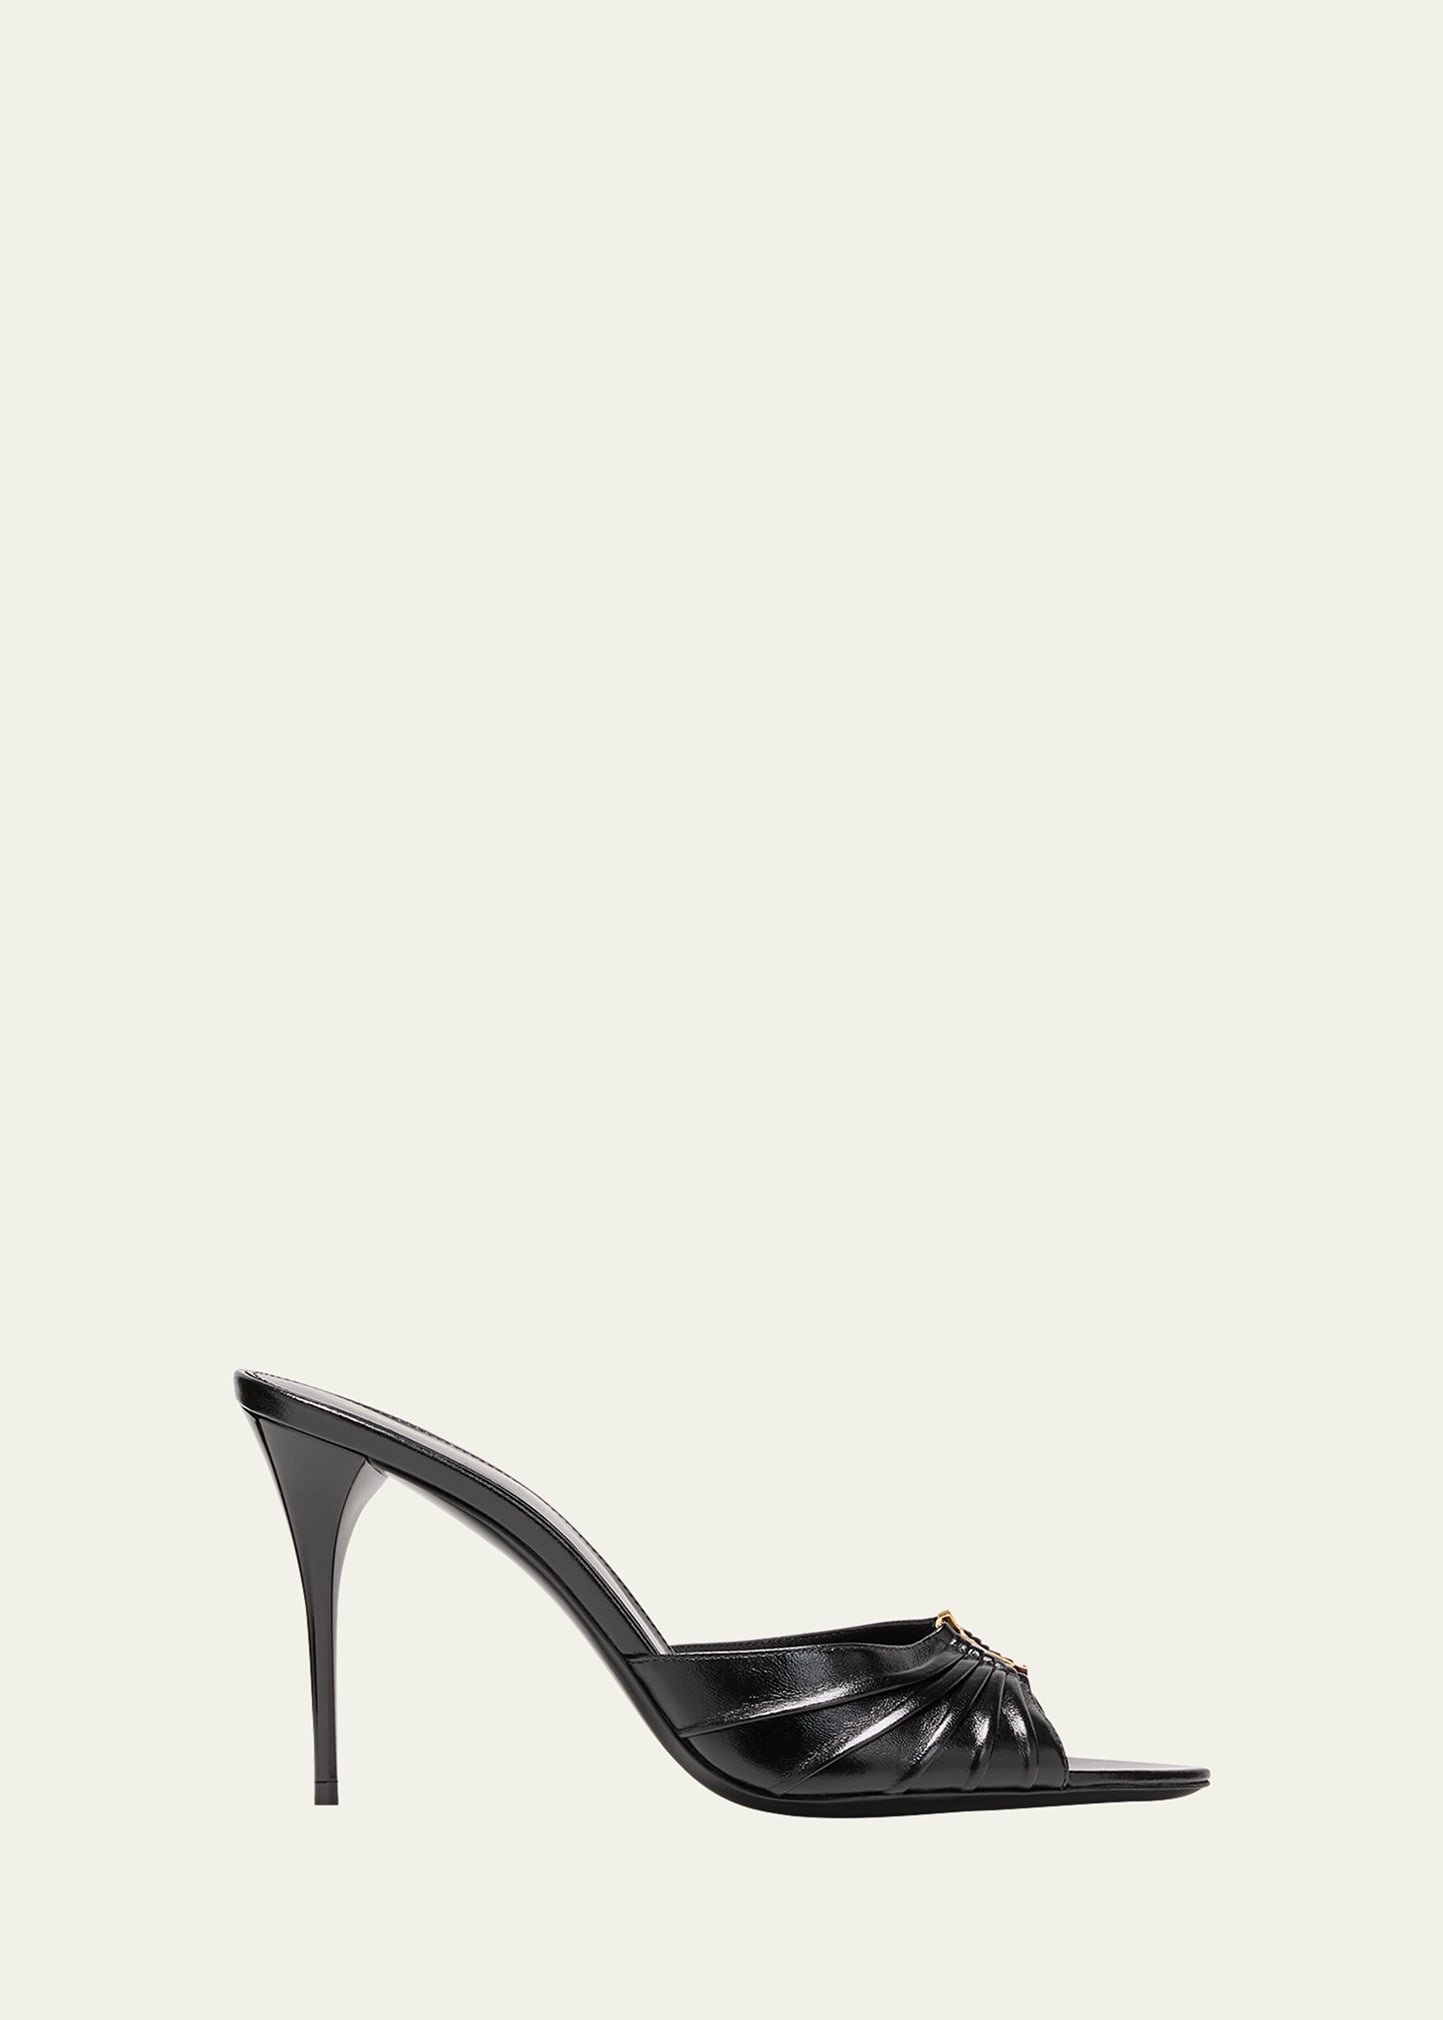 Babylone YSL Ruched Leather Mule Sandals